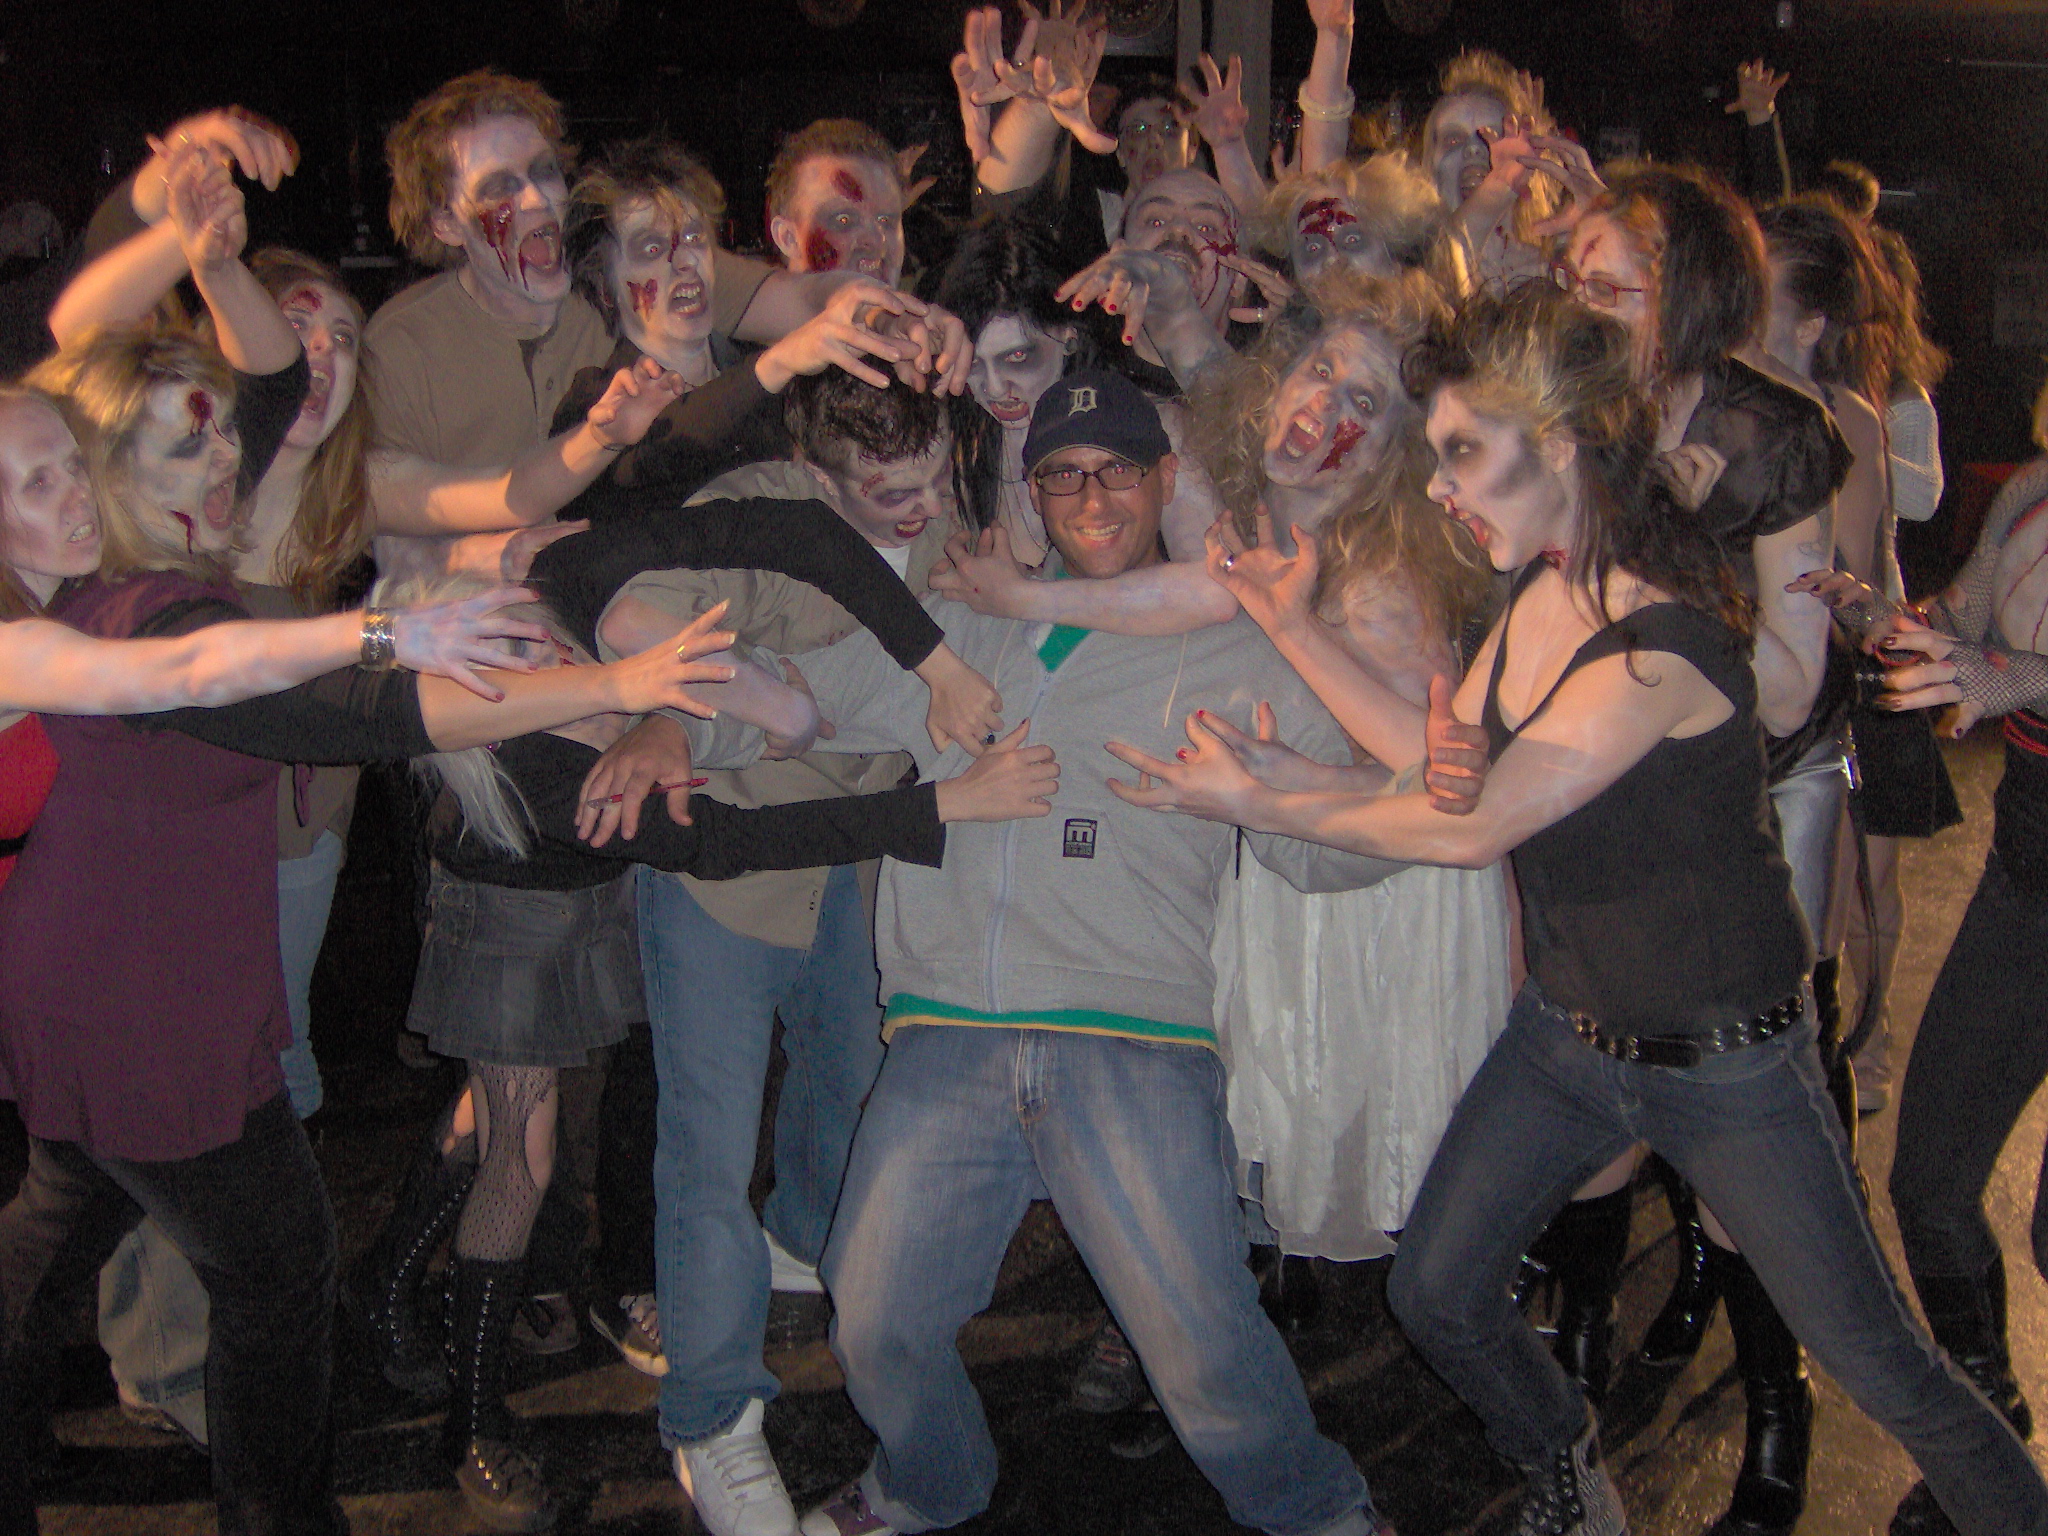 Director David Langlois surrounded by zombies on the set of Jet Set Satellite's 